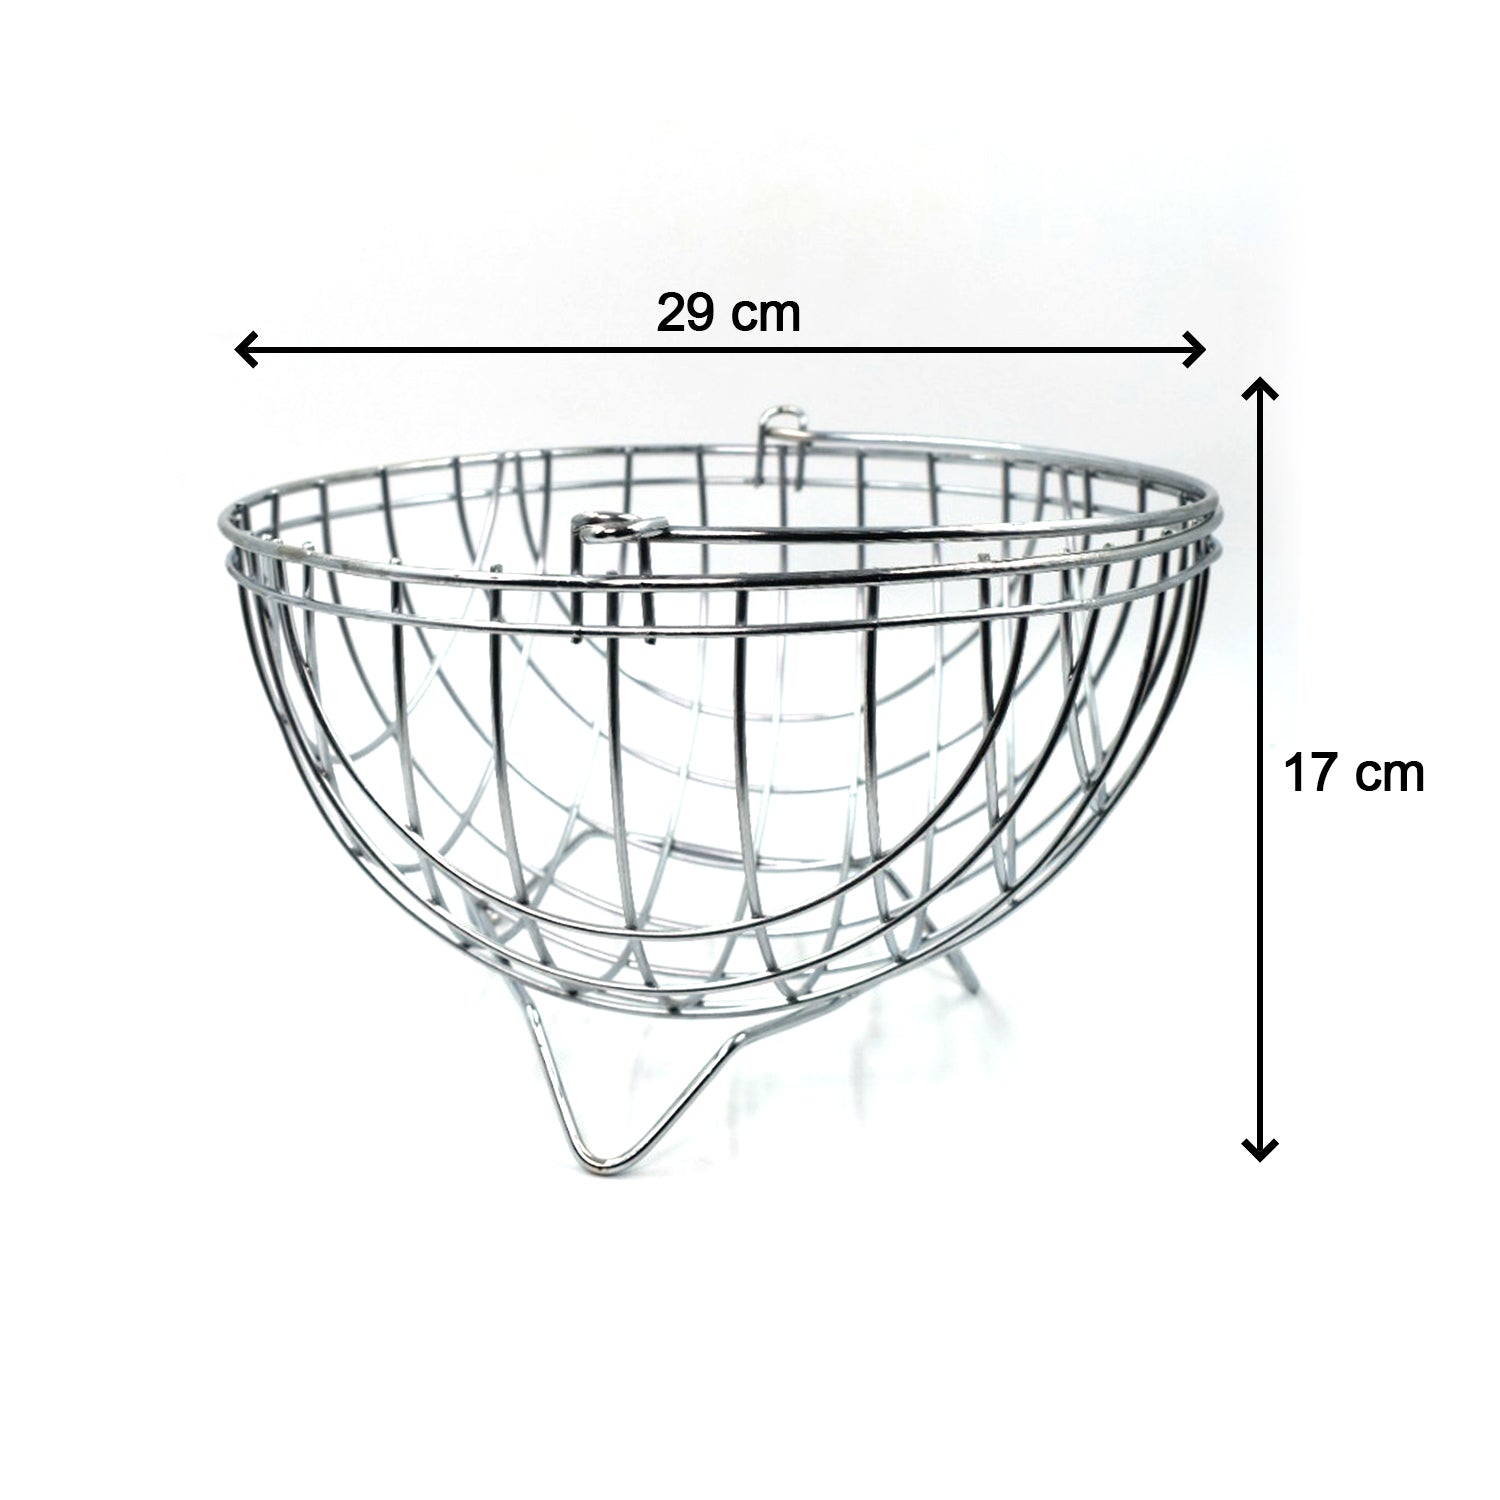 2742 SS Round Fruit Basket used for holding fruits as a decorative and using purposes in all kinds of official and household places etc. 